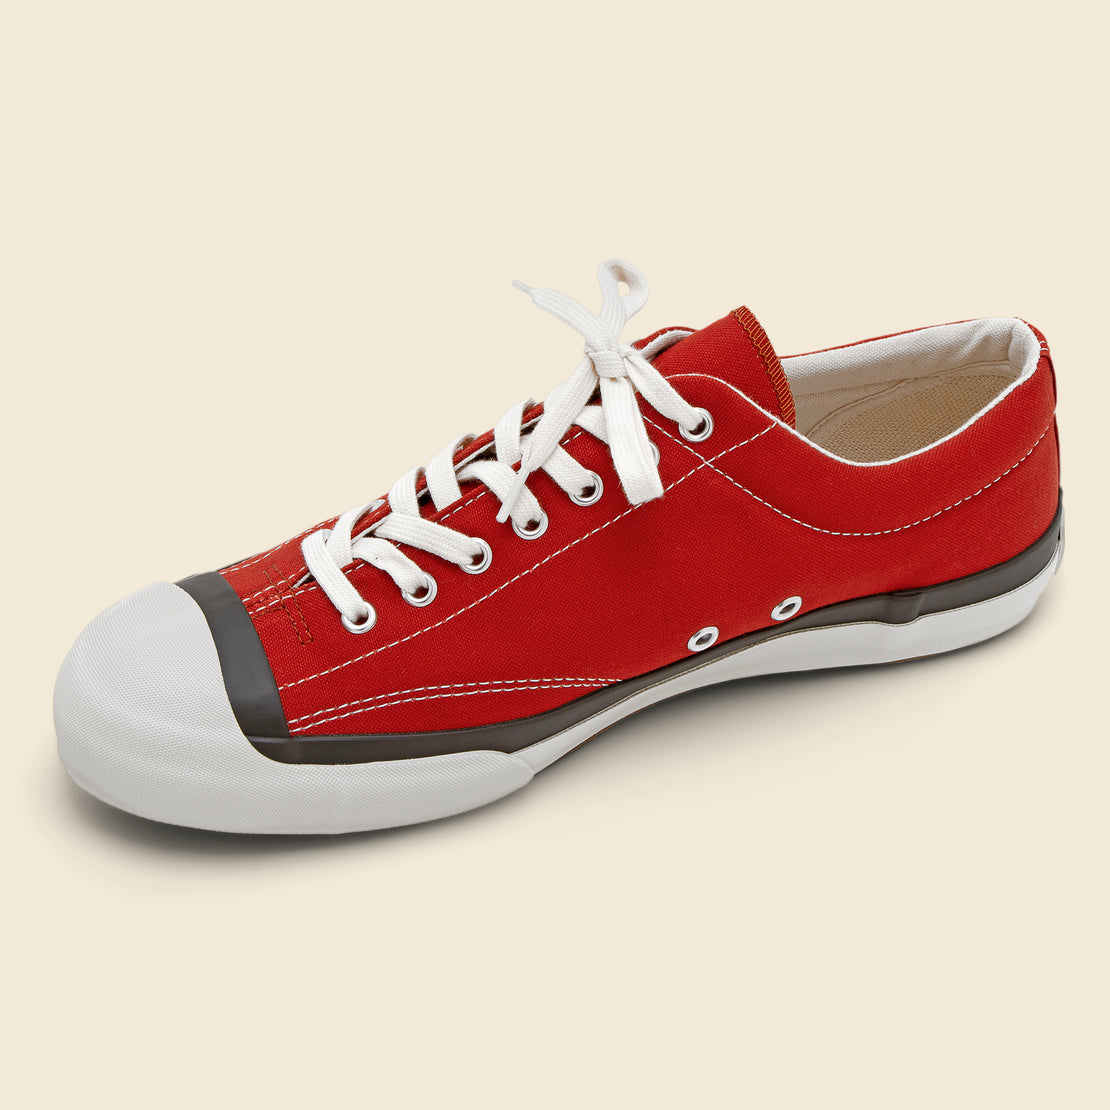 Gym Court Sneaker - Brick - Shoes Like Pottery - STAG Provisions - Shoes - Athletic